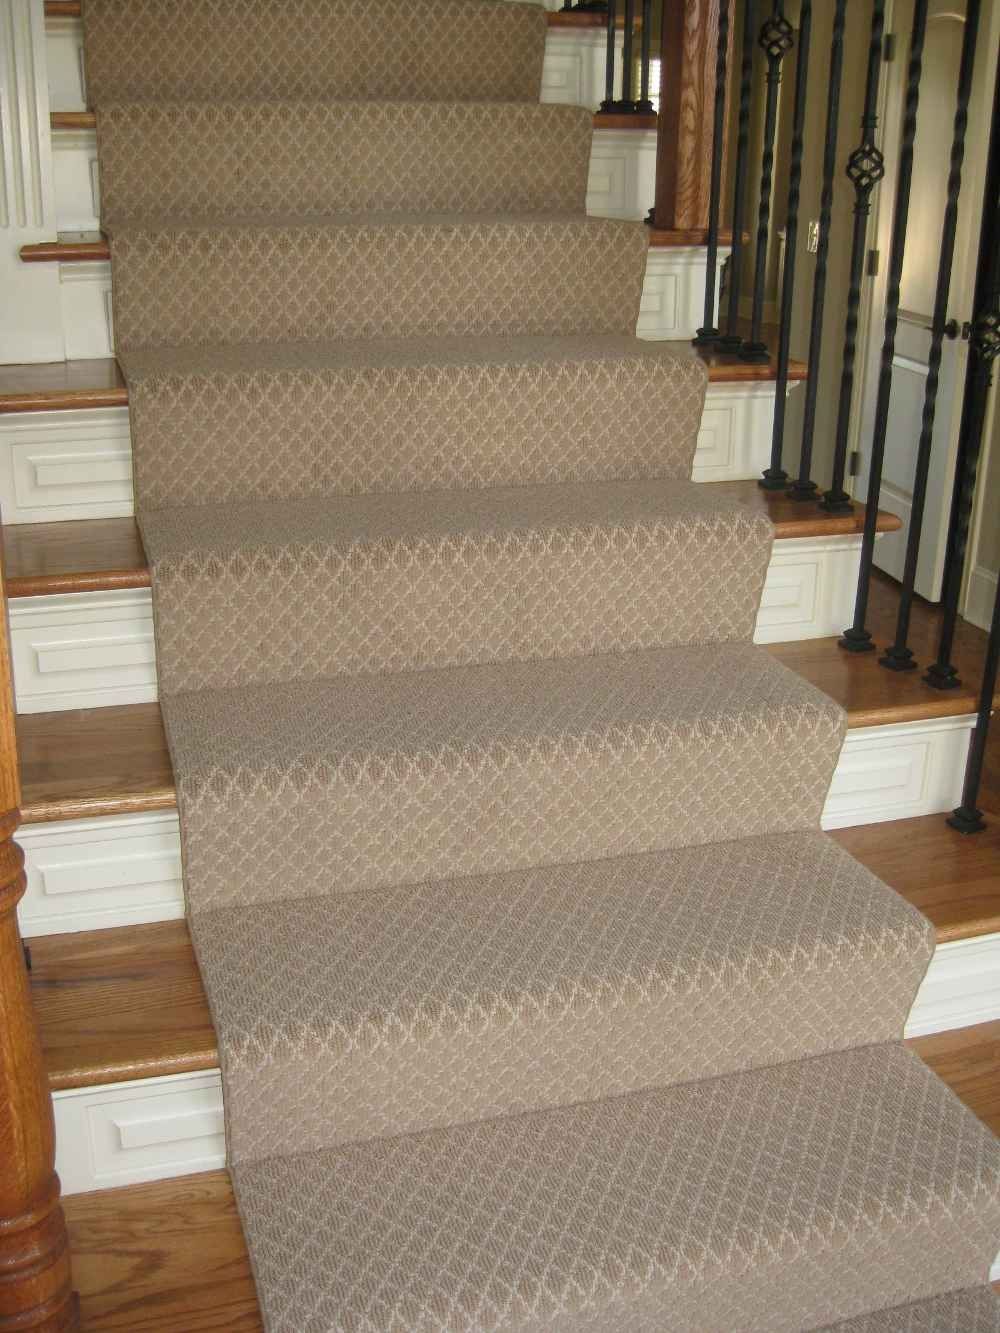 Keep Plastic Carpet Runners For Stairs Interior Home Design Within Clear Stair Tread Carpet Protectors (View 15 of 20)